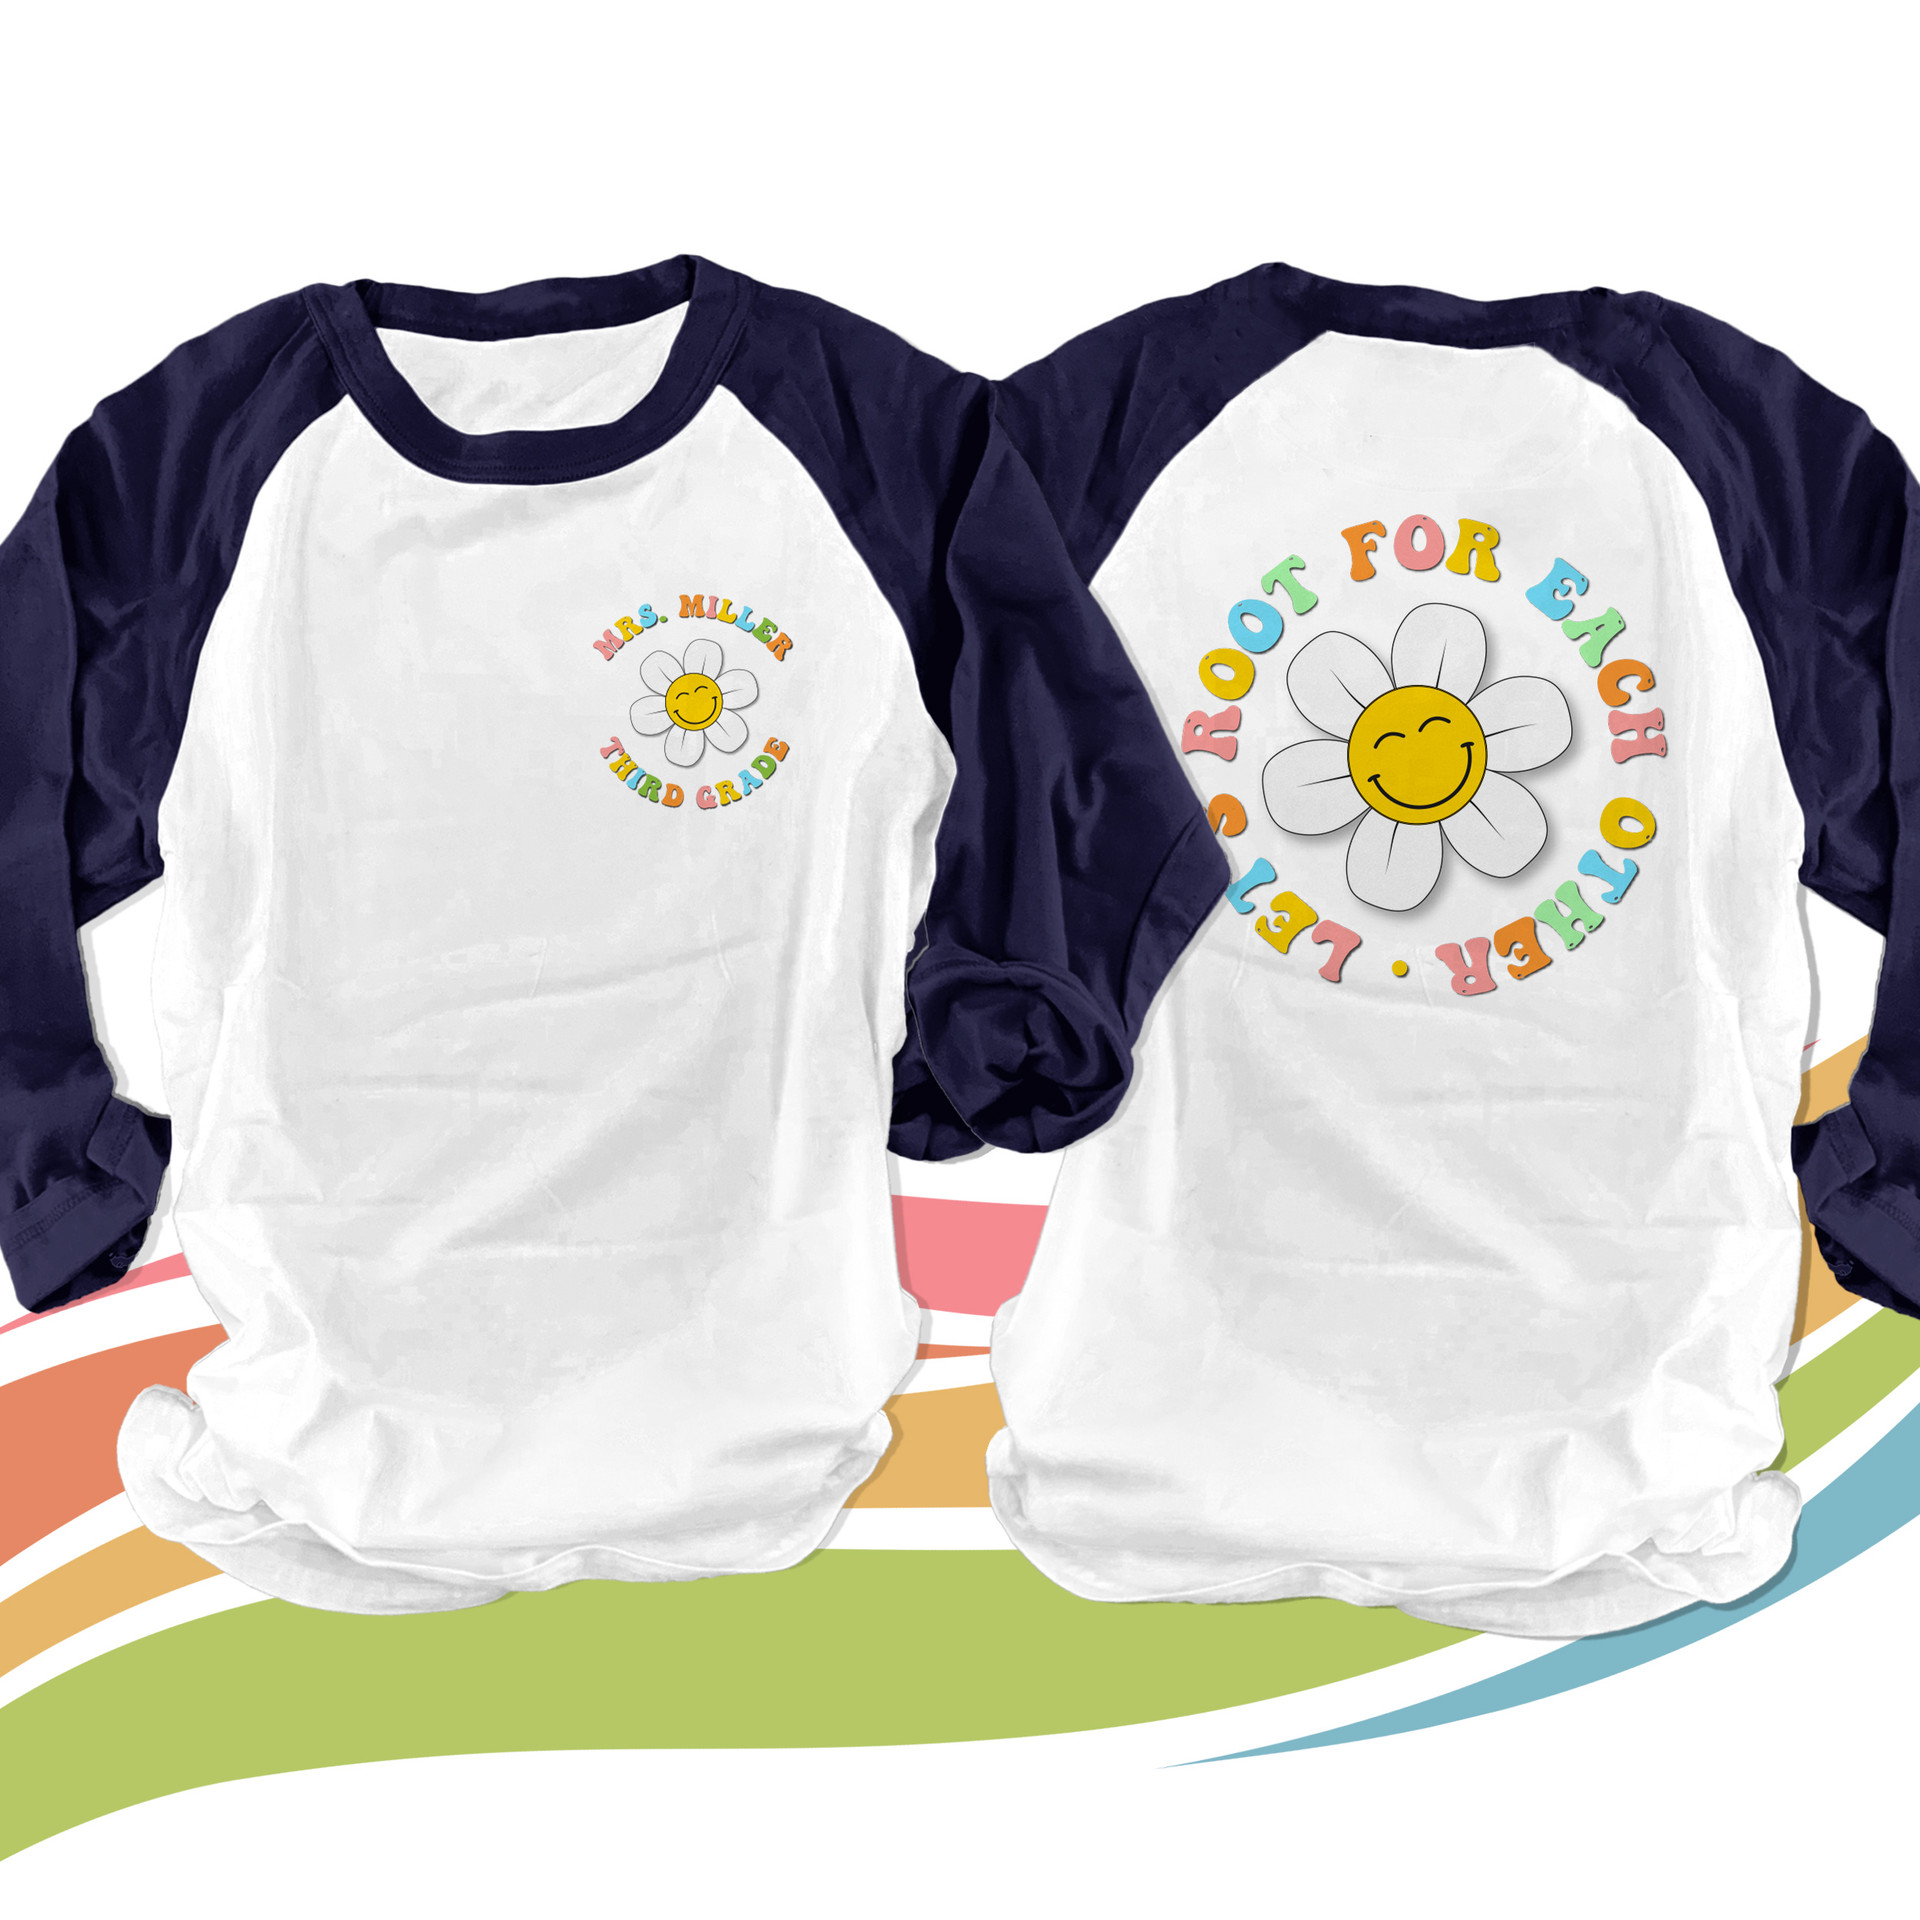 Zoey's Attic Personalized Gifts - Custom T Shirts